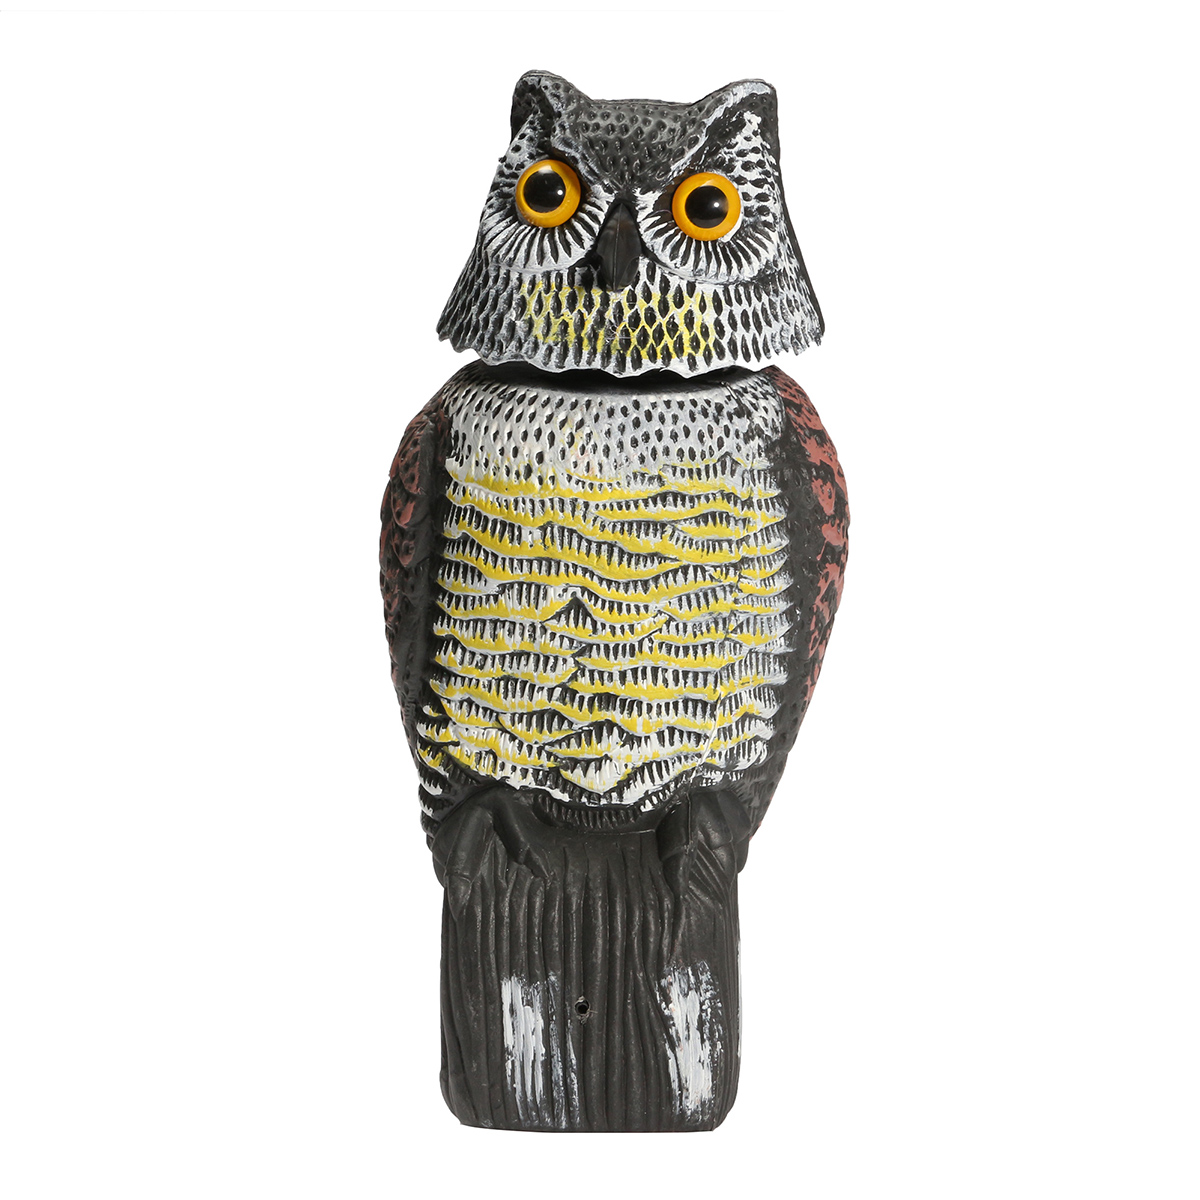 Artificial Resin Owl with Rotating Head Garden Yard Landscape Ornament Outdoor Hunting Decoy